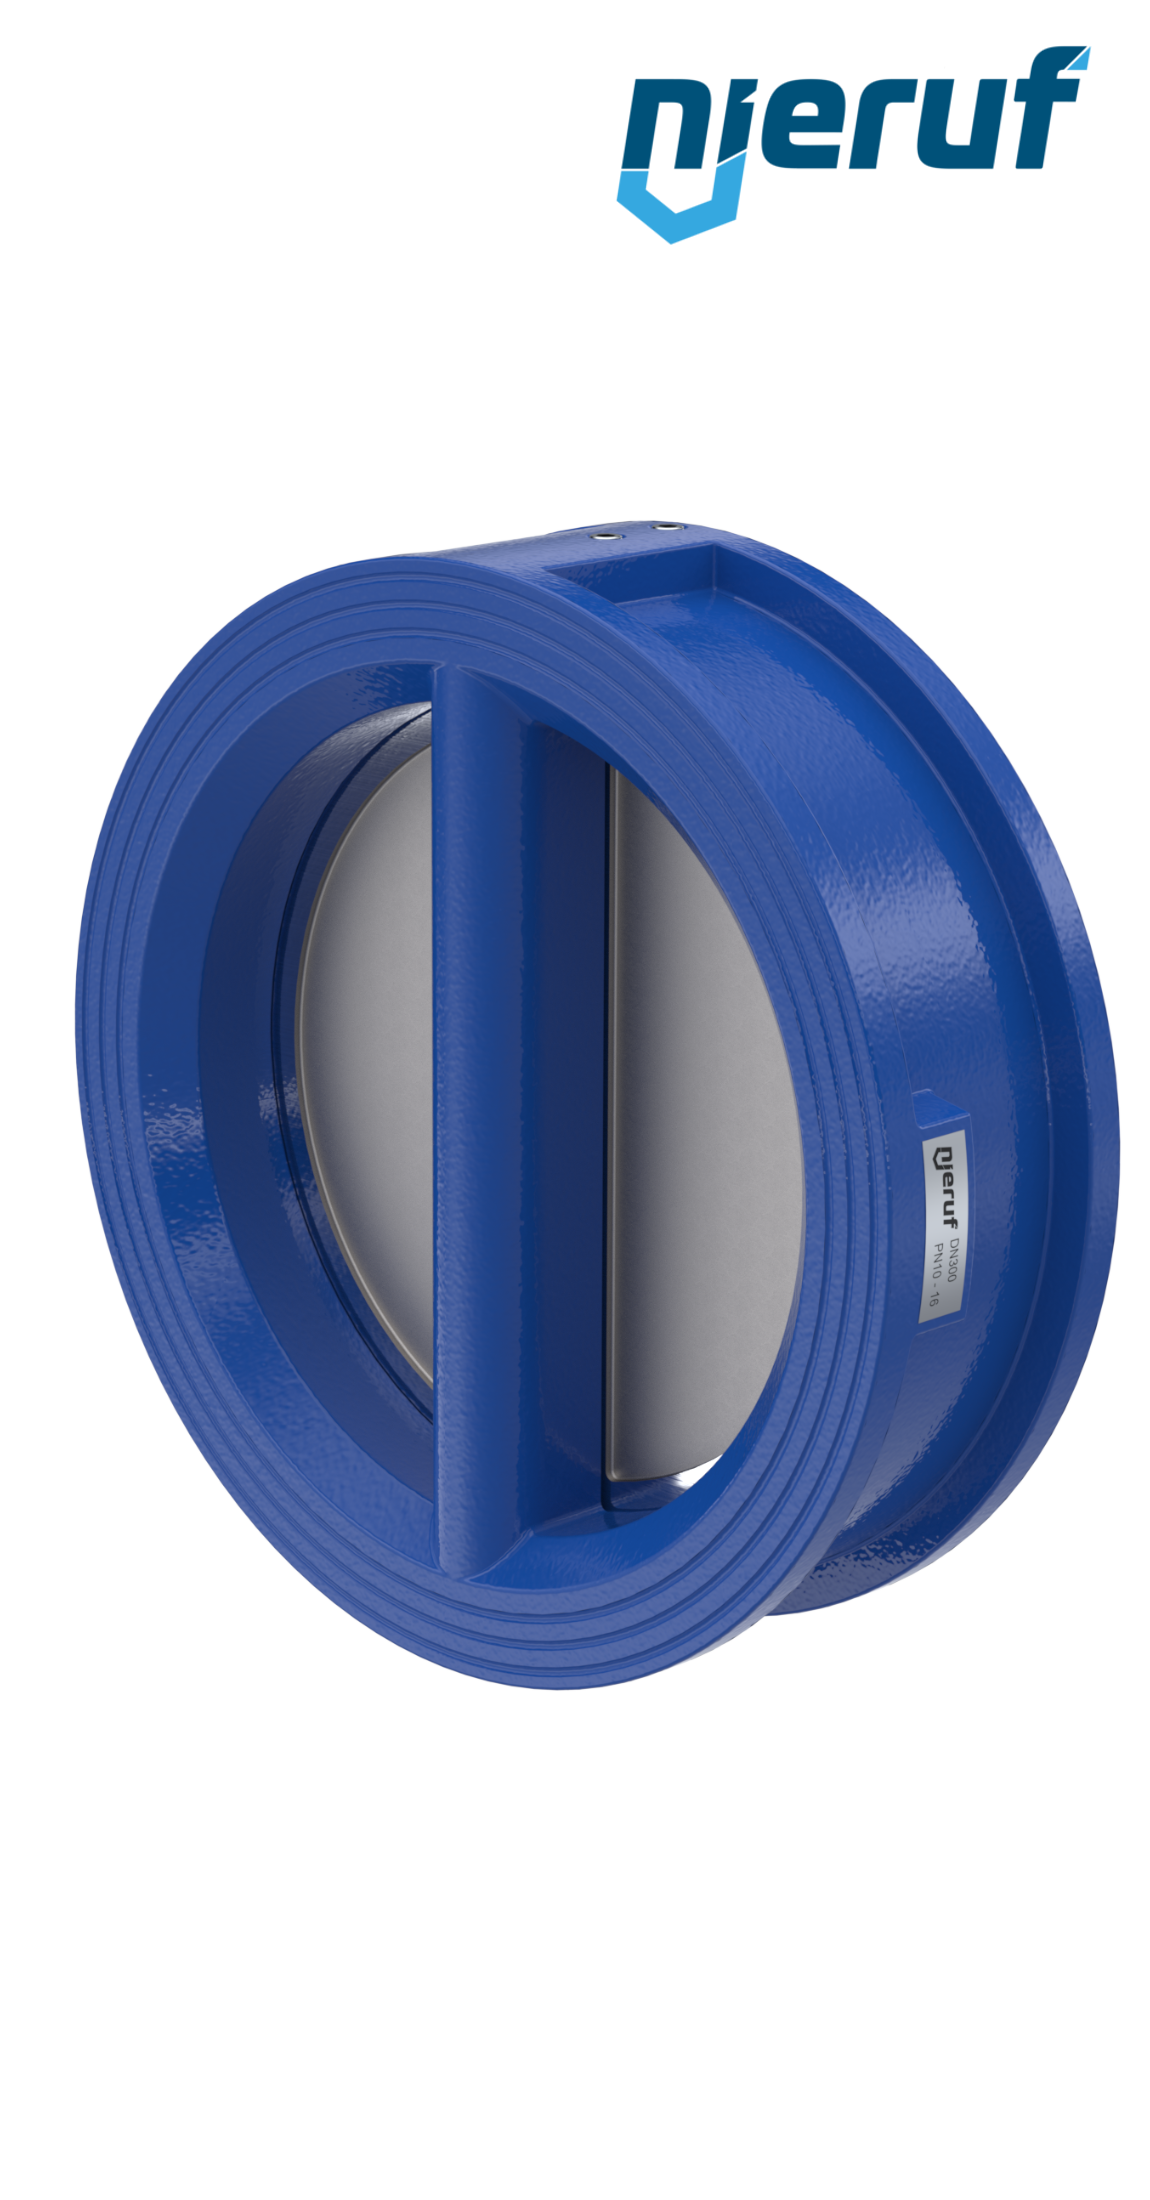 dual plate check valve DN300 DR02 GGG40 epoxyd plated blue 180µm EPDM